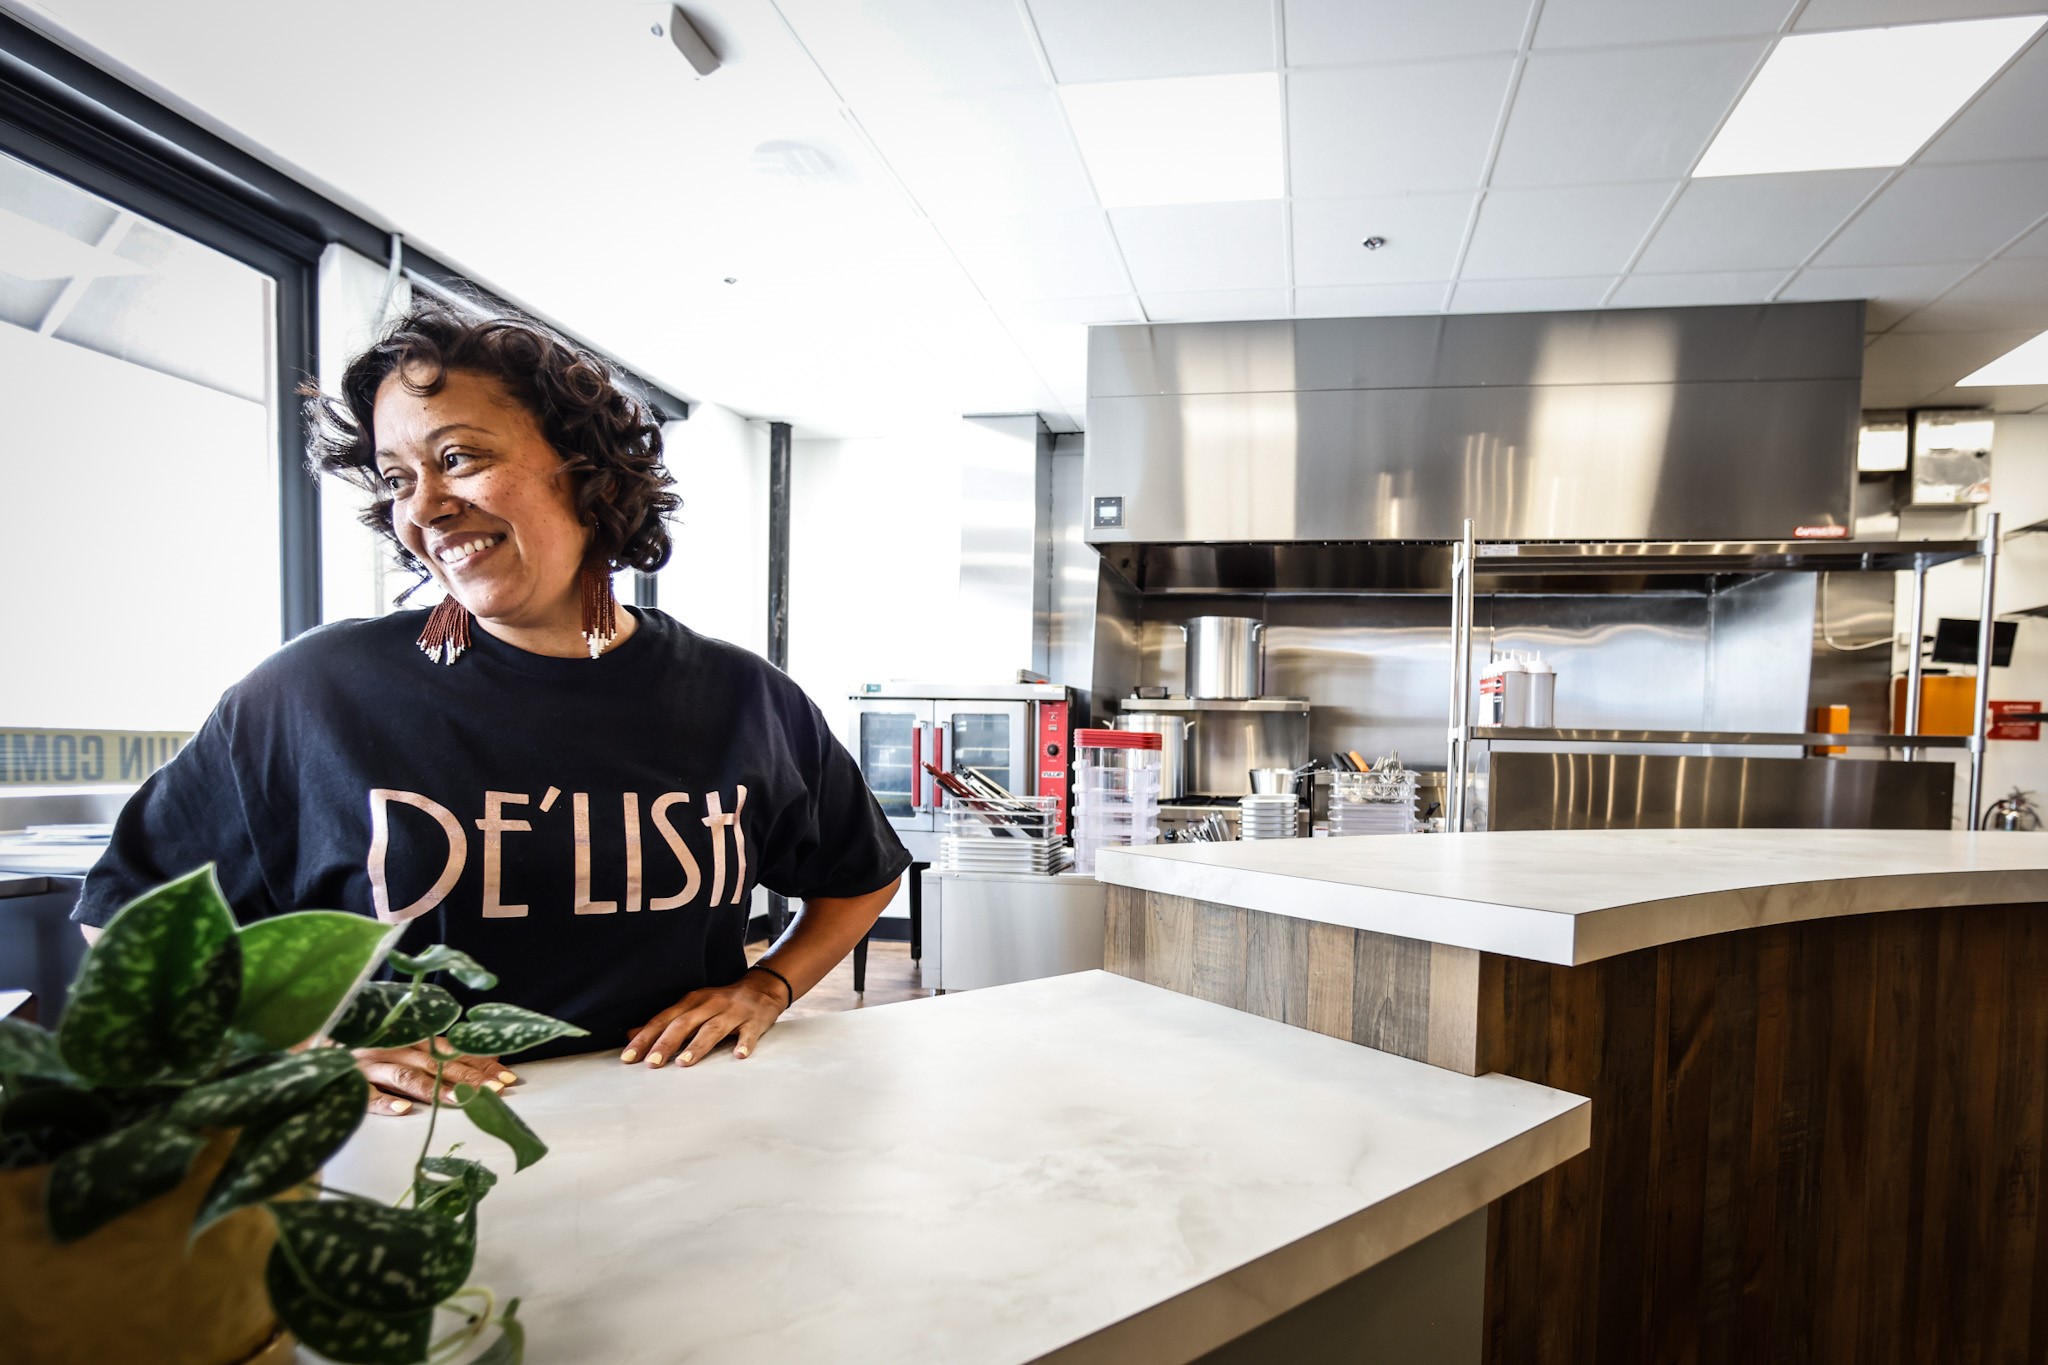 Jasmine Brown is the owner of De'Lish the home of Cajun, creole, comfort food inside West Social Tap and Table which will open July 25th in the Wright-Dunbar Neighborhood. JIM NOELKER/STAFF